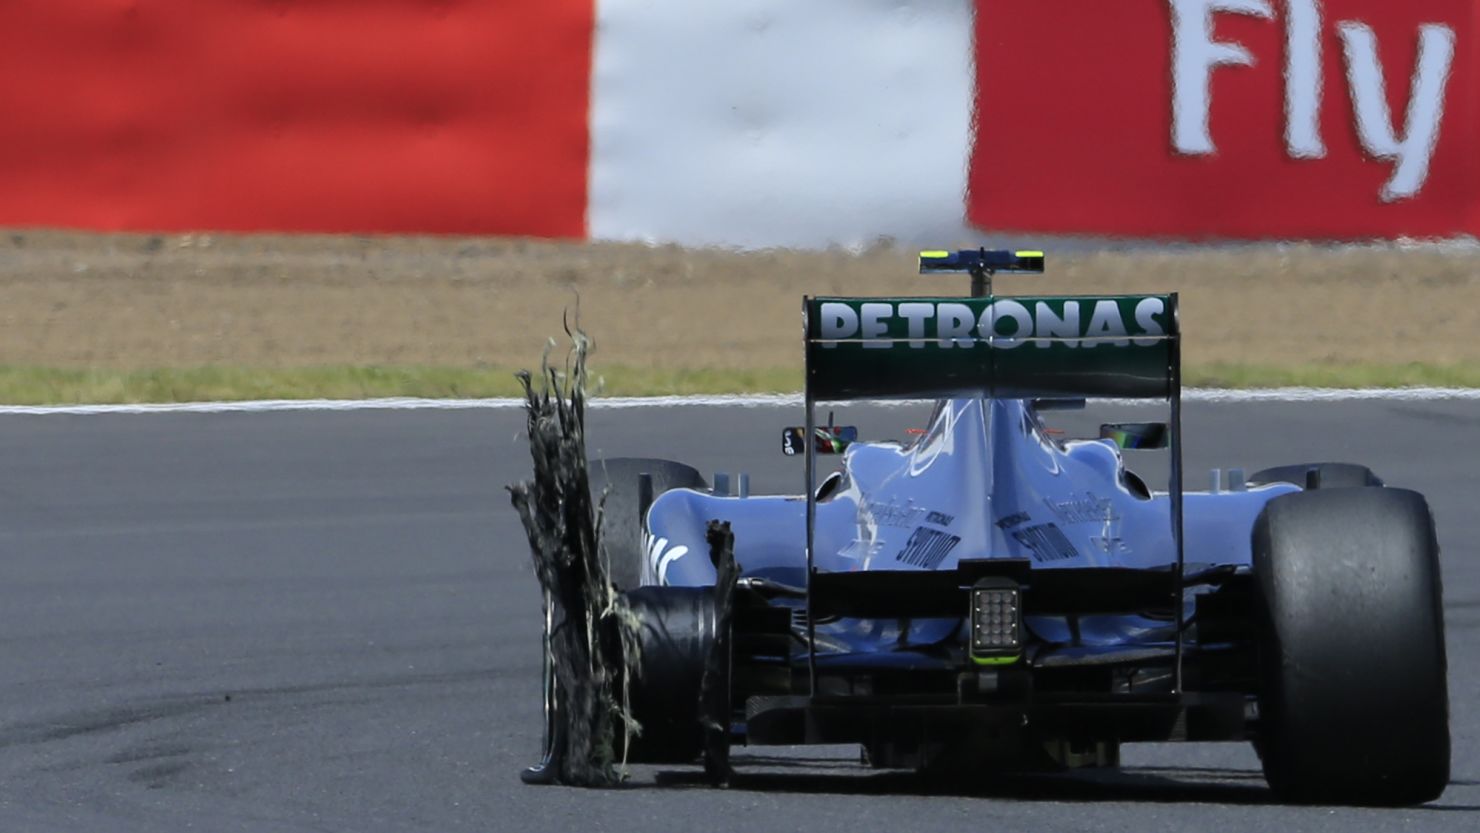 Formula One's governing body has agreed to in-season tire testing to safeguard driver safety